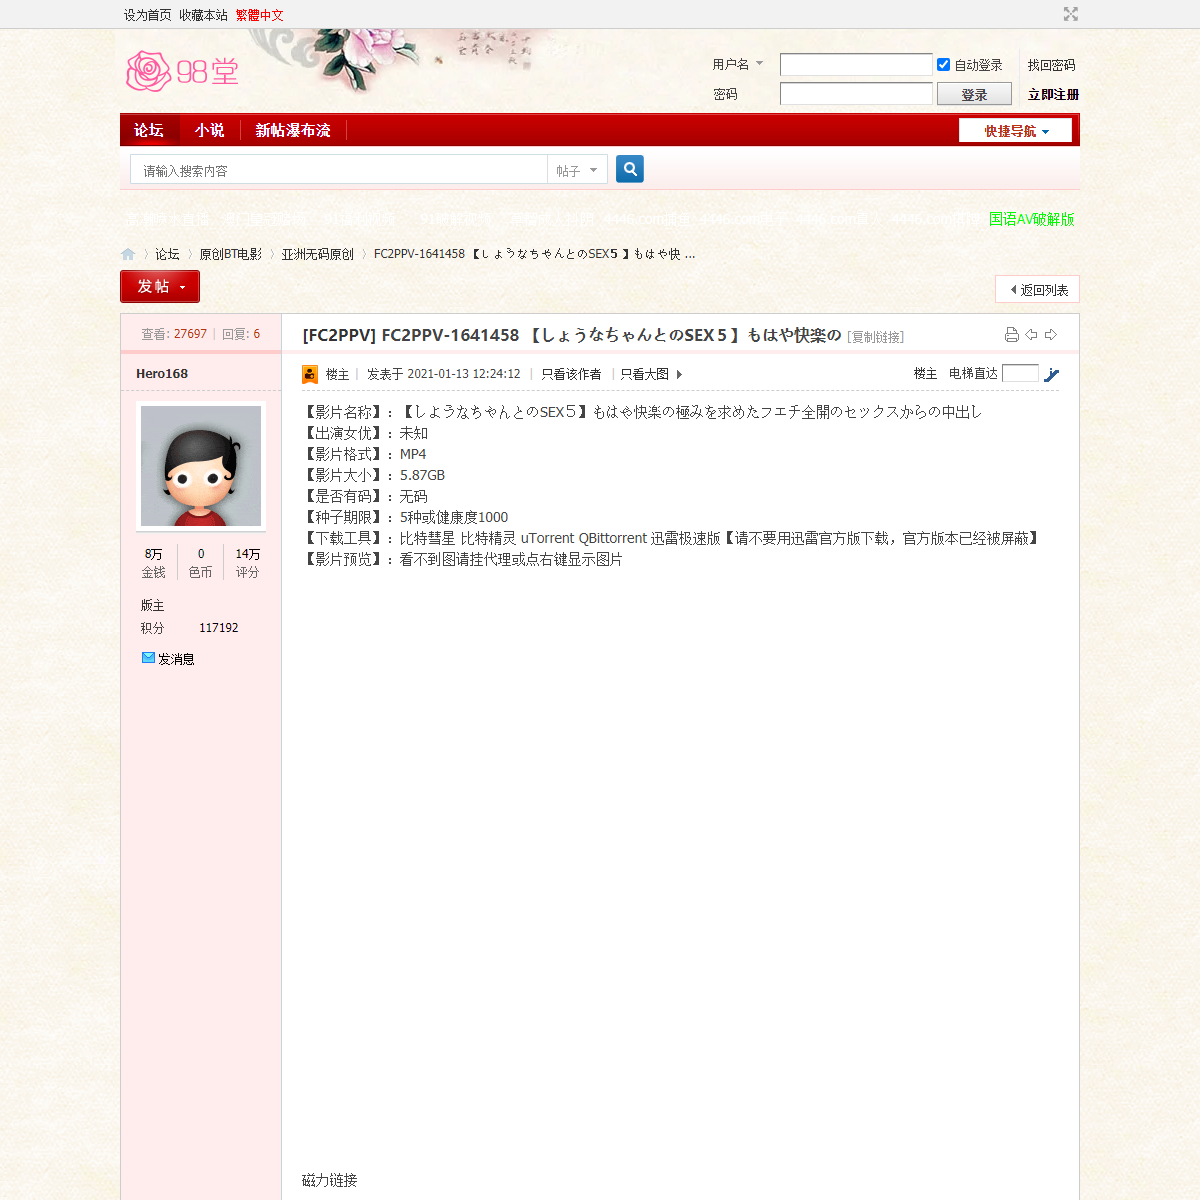 A complete backup of https://www.sehuatang.net/thread-442355-1-1.html